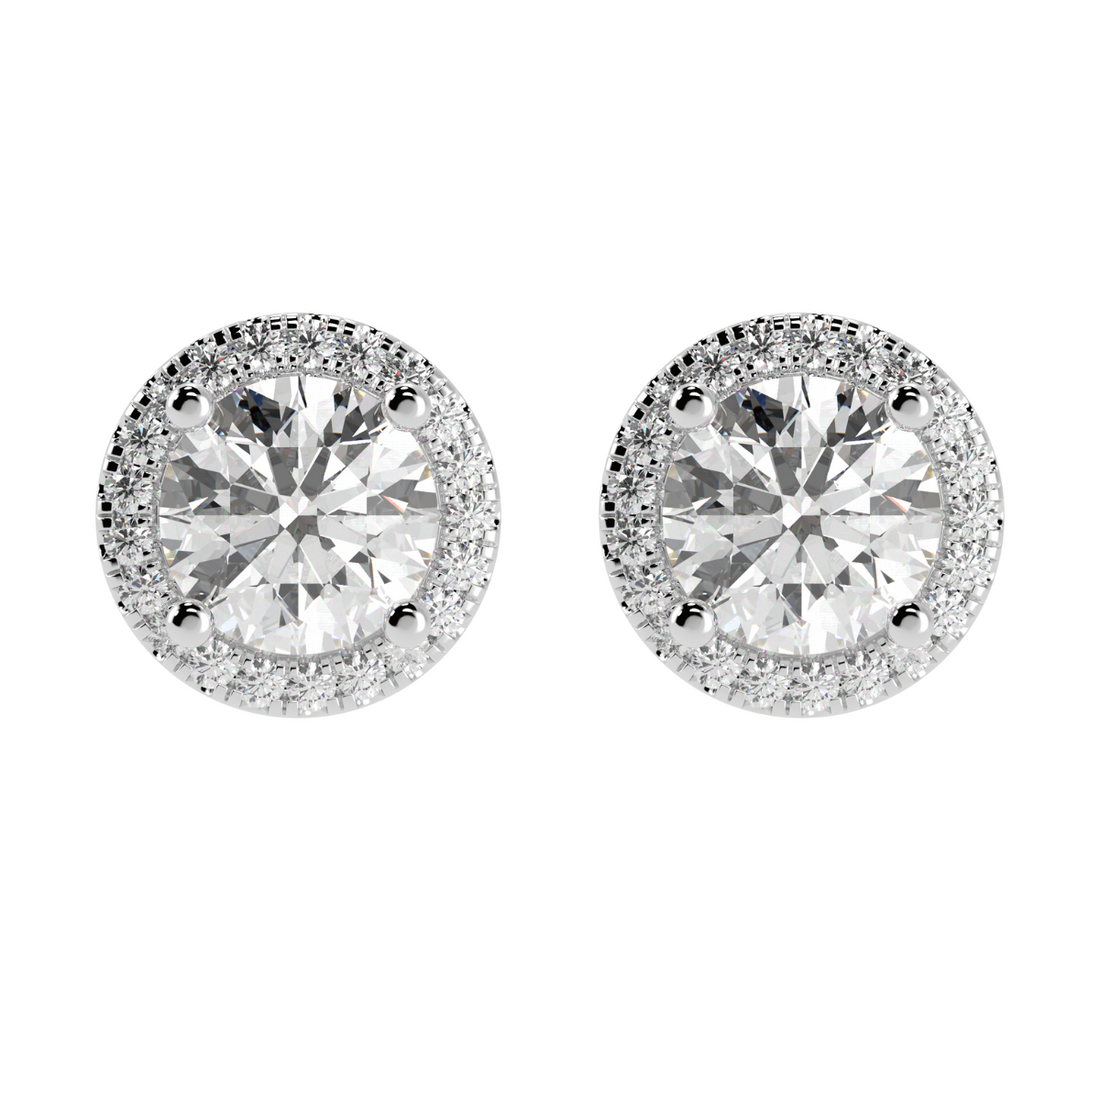 Halo Round Solitaire Stud Earrings